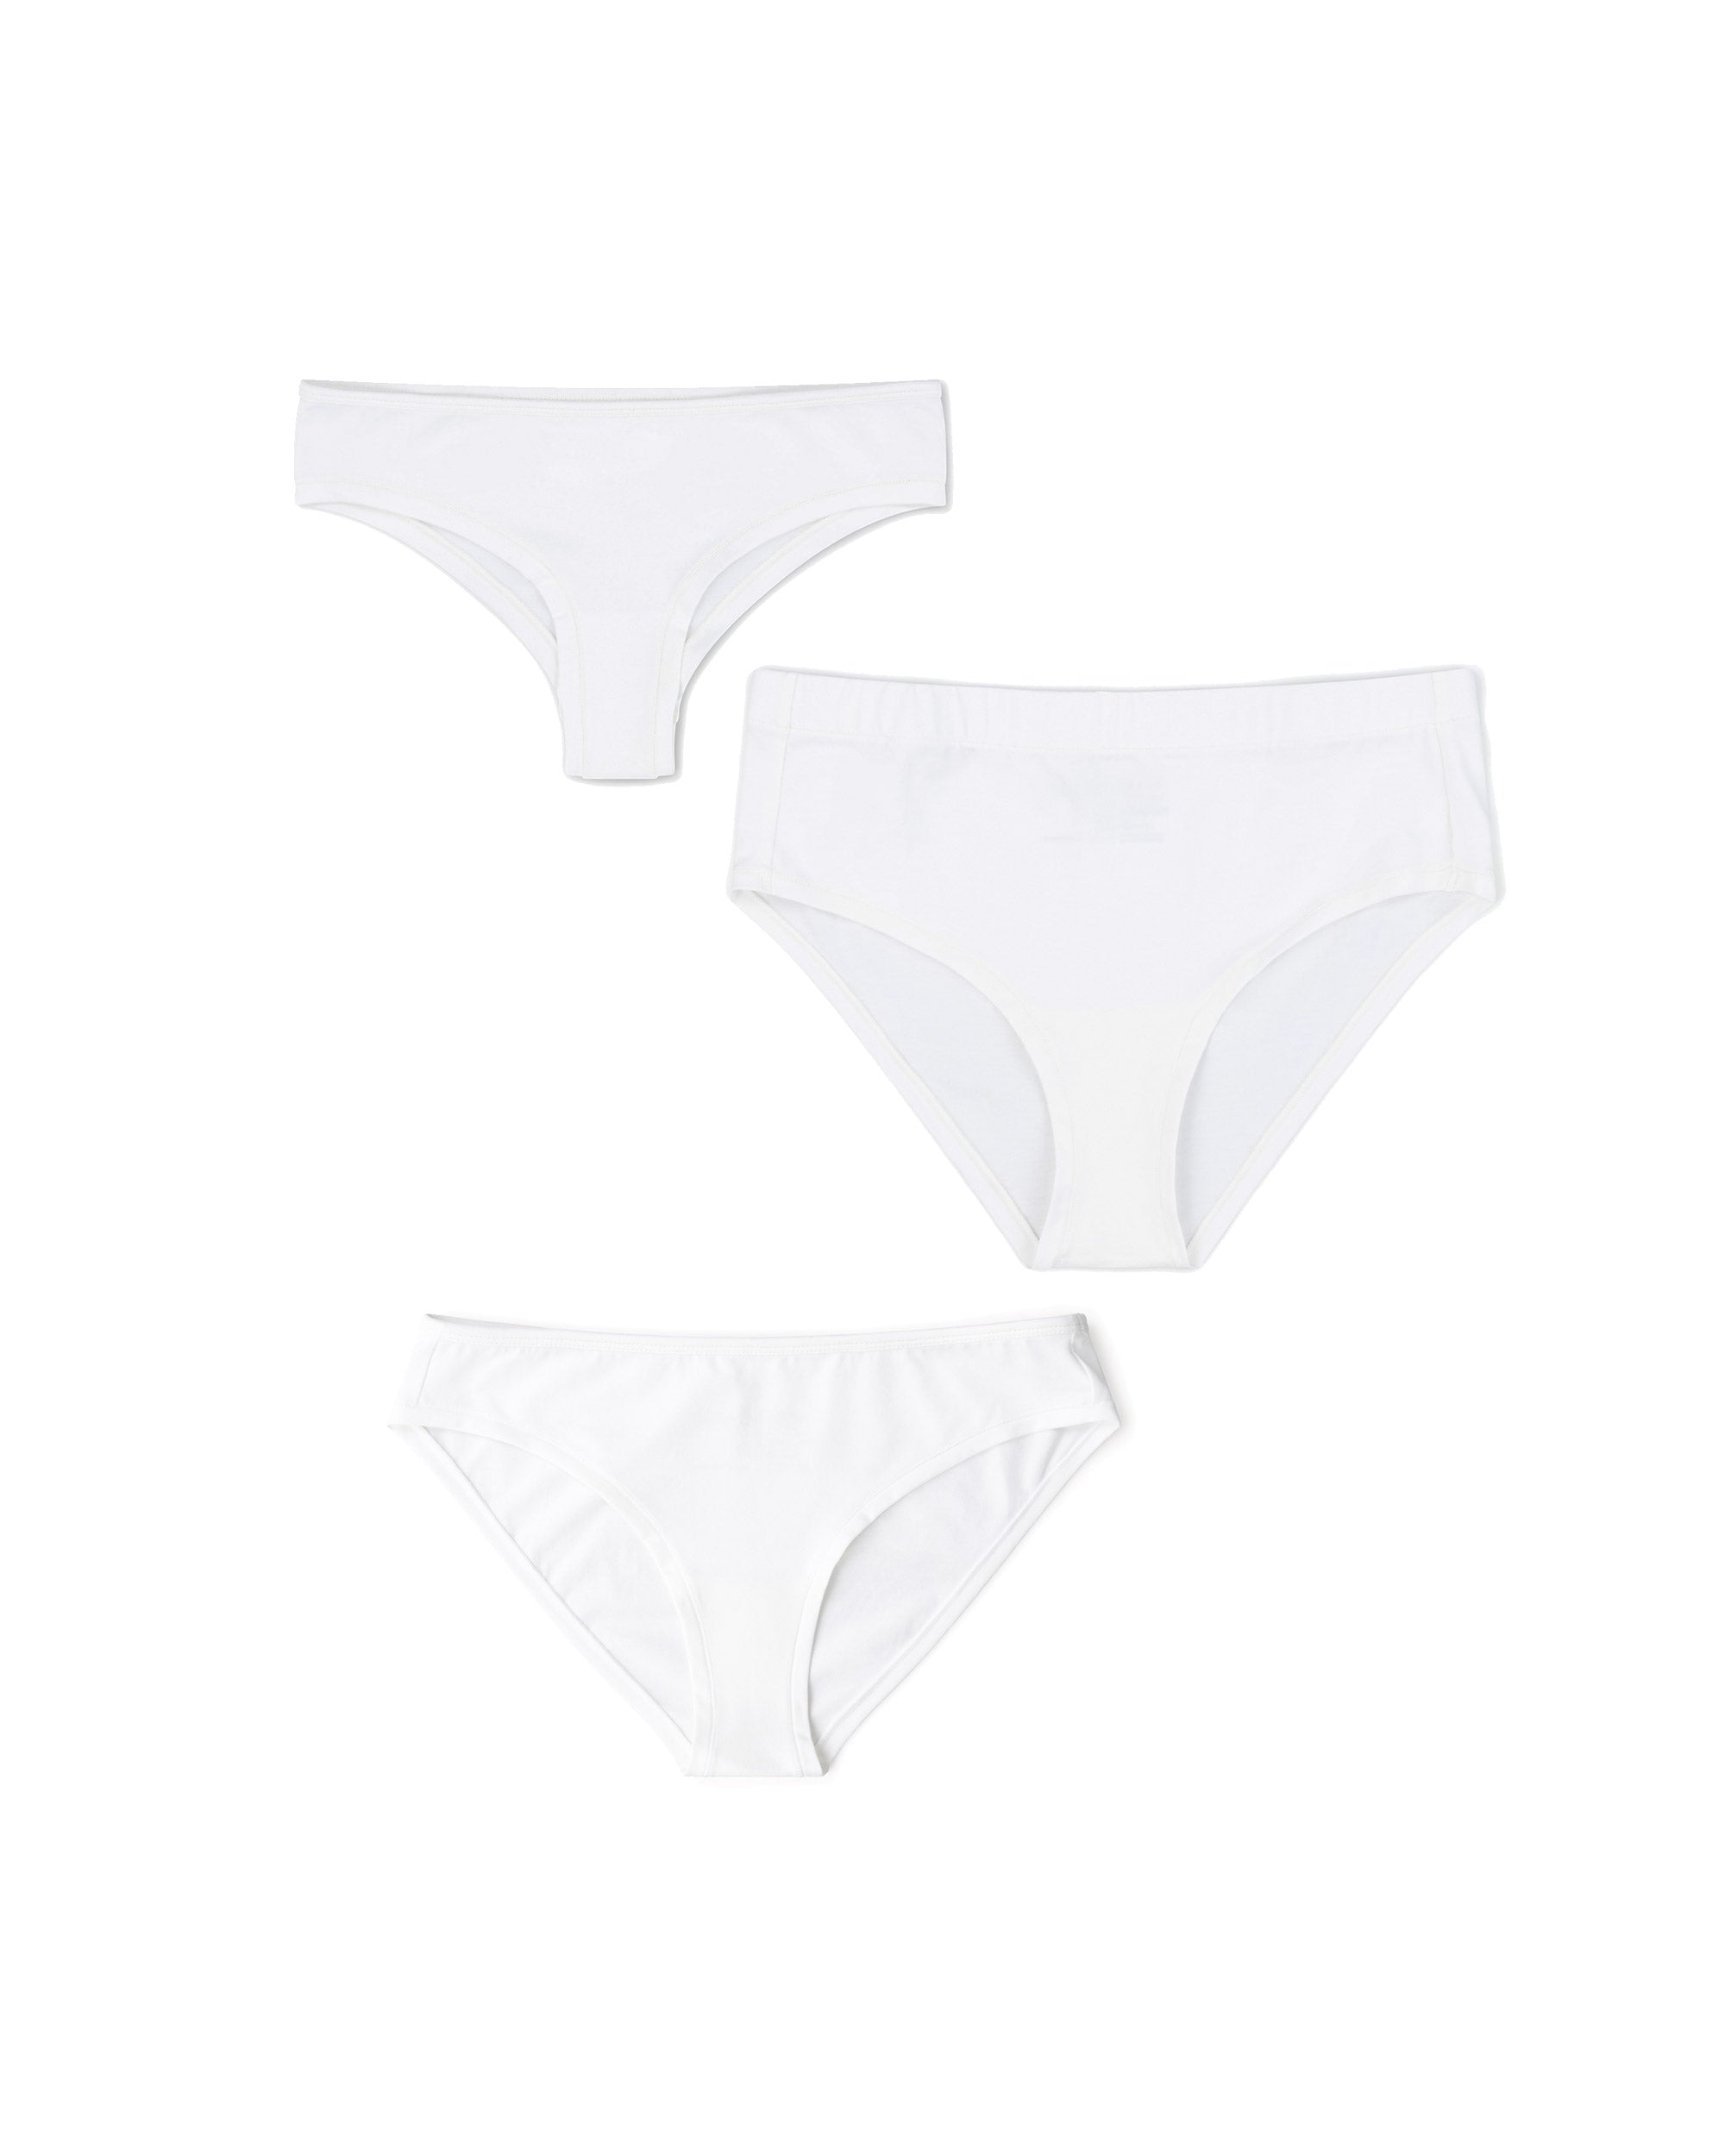 ONE Essentials organic cotton and biodegradable stretch mix style set in soft white